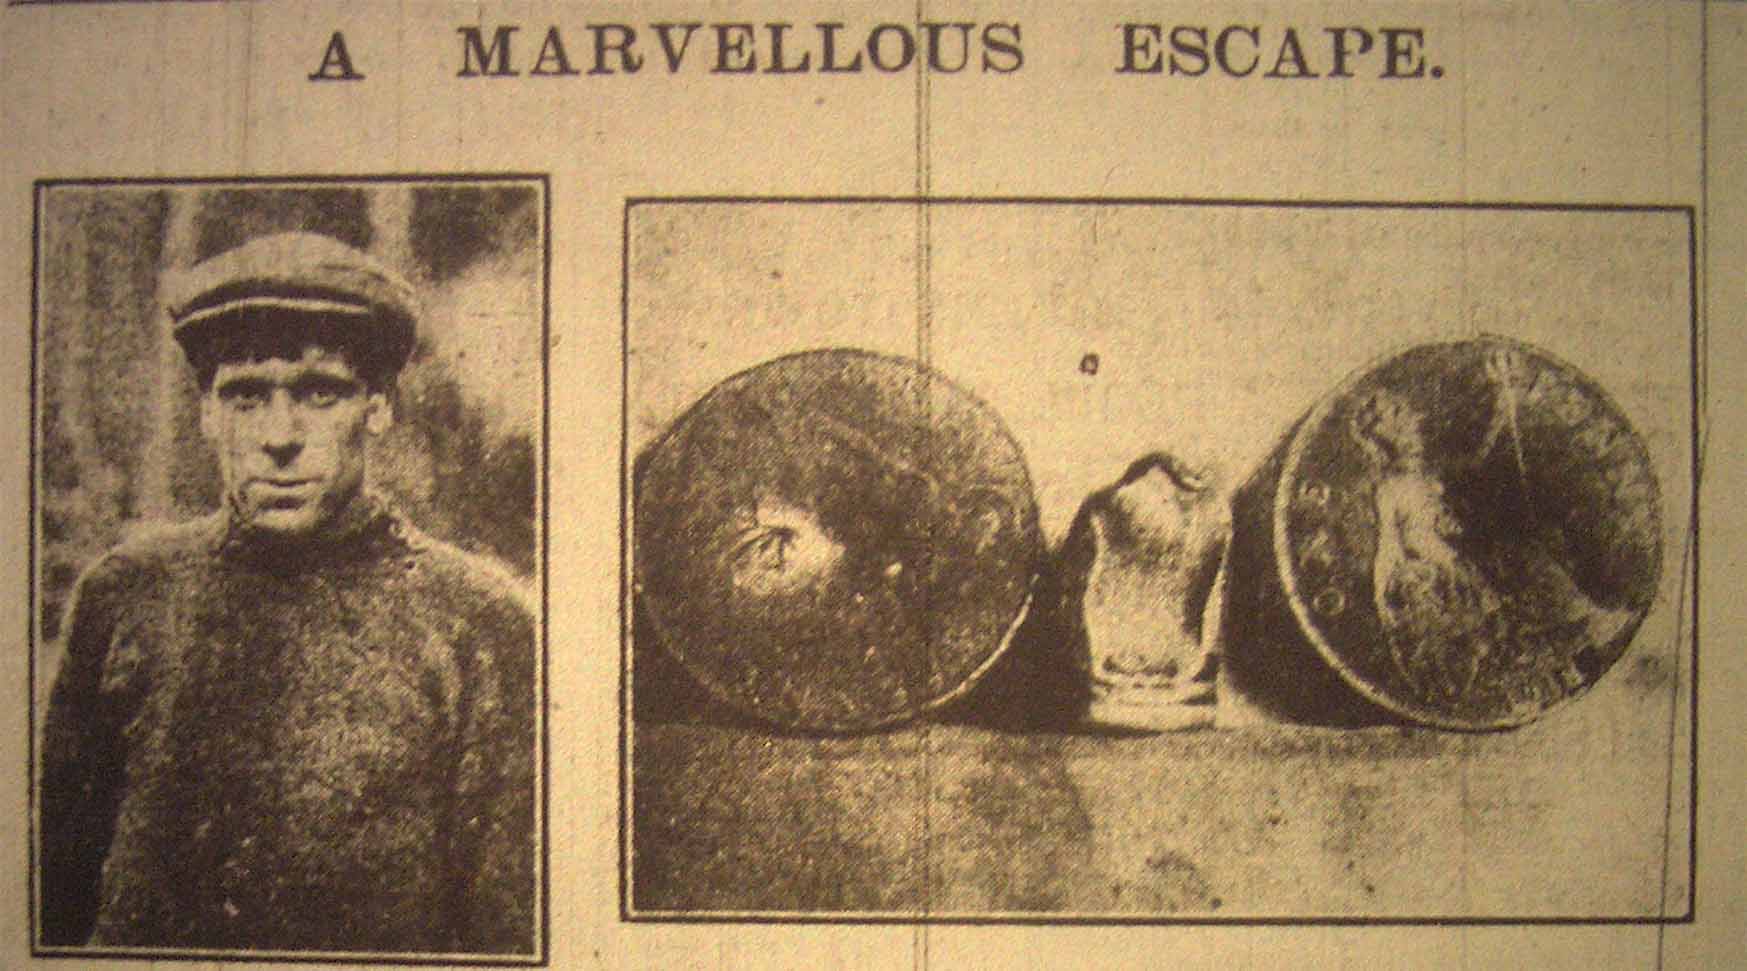 The Cork Examiner of 5th August 1920 published the story headed 'A Marvellous Escape' accompanied by a photograph of McSweeney, the bent bullet and the dented coins.